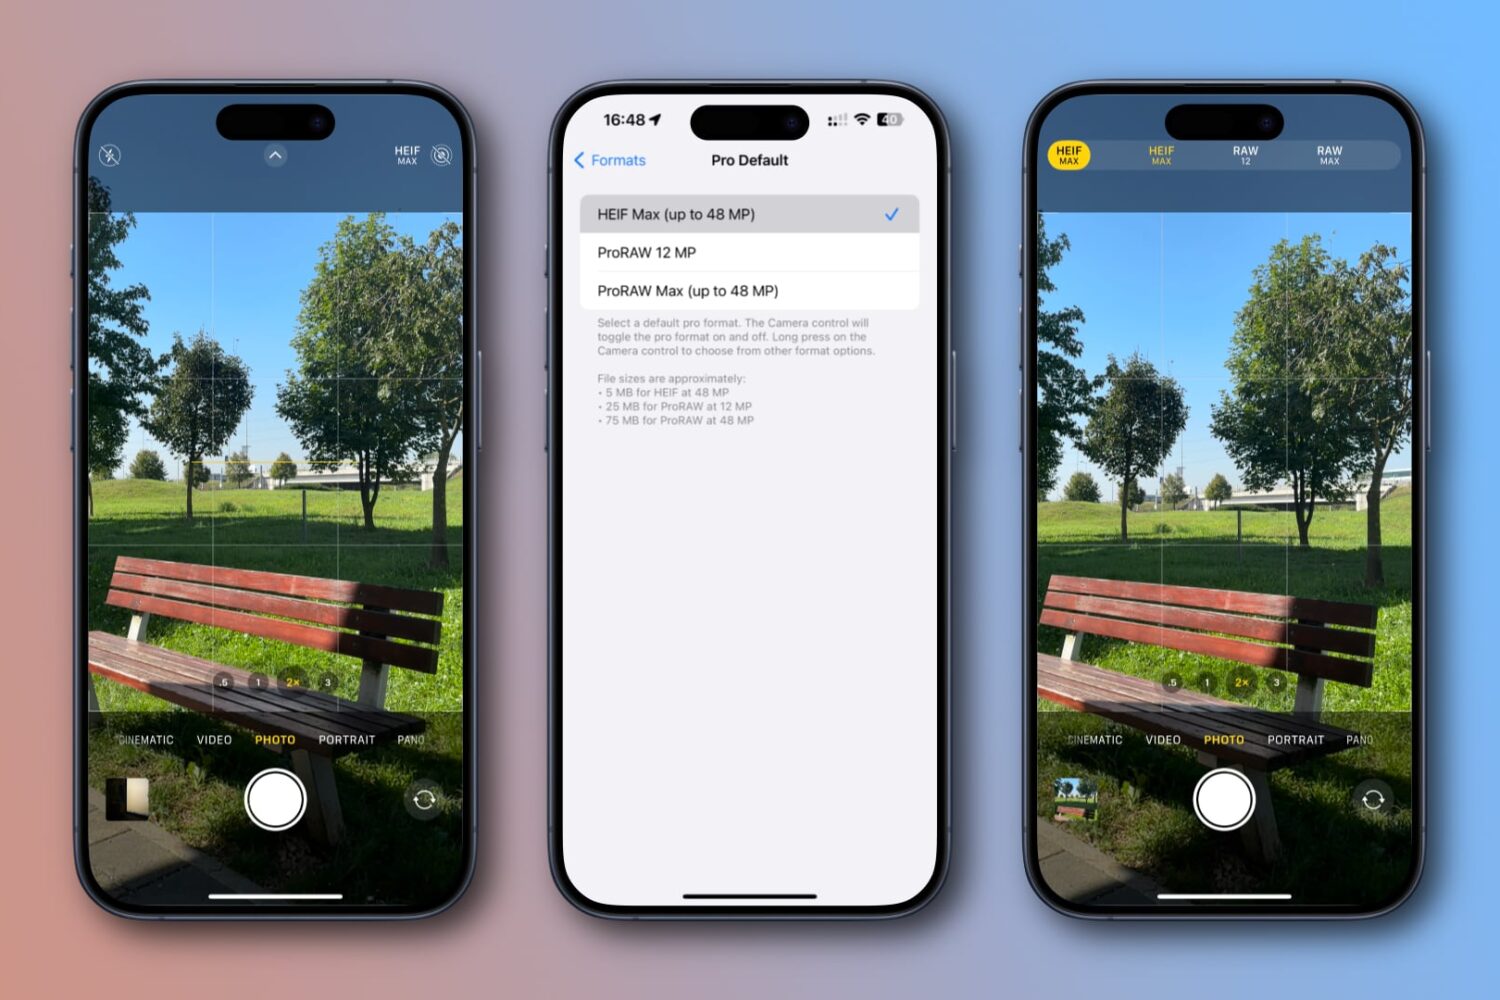 Pro camera format and resolution control on iPhone